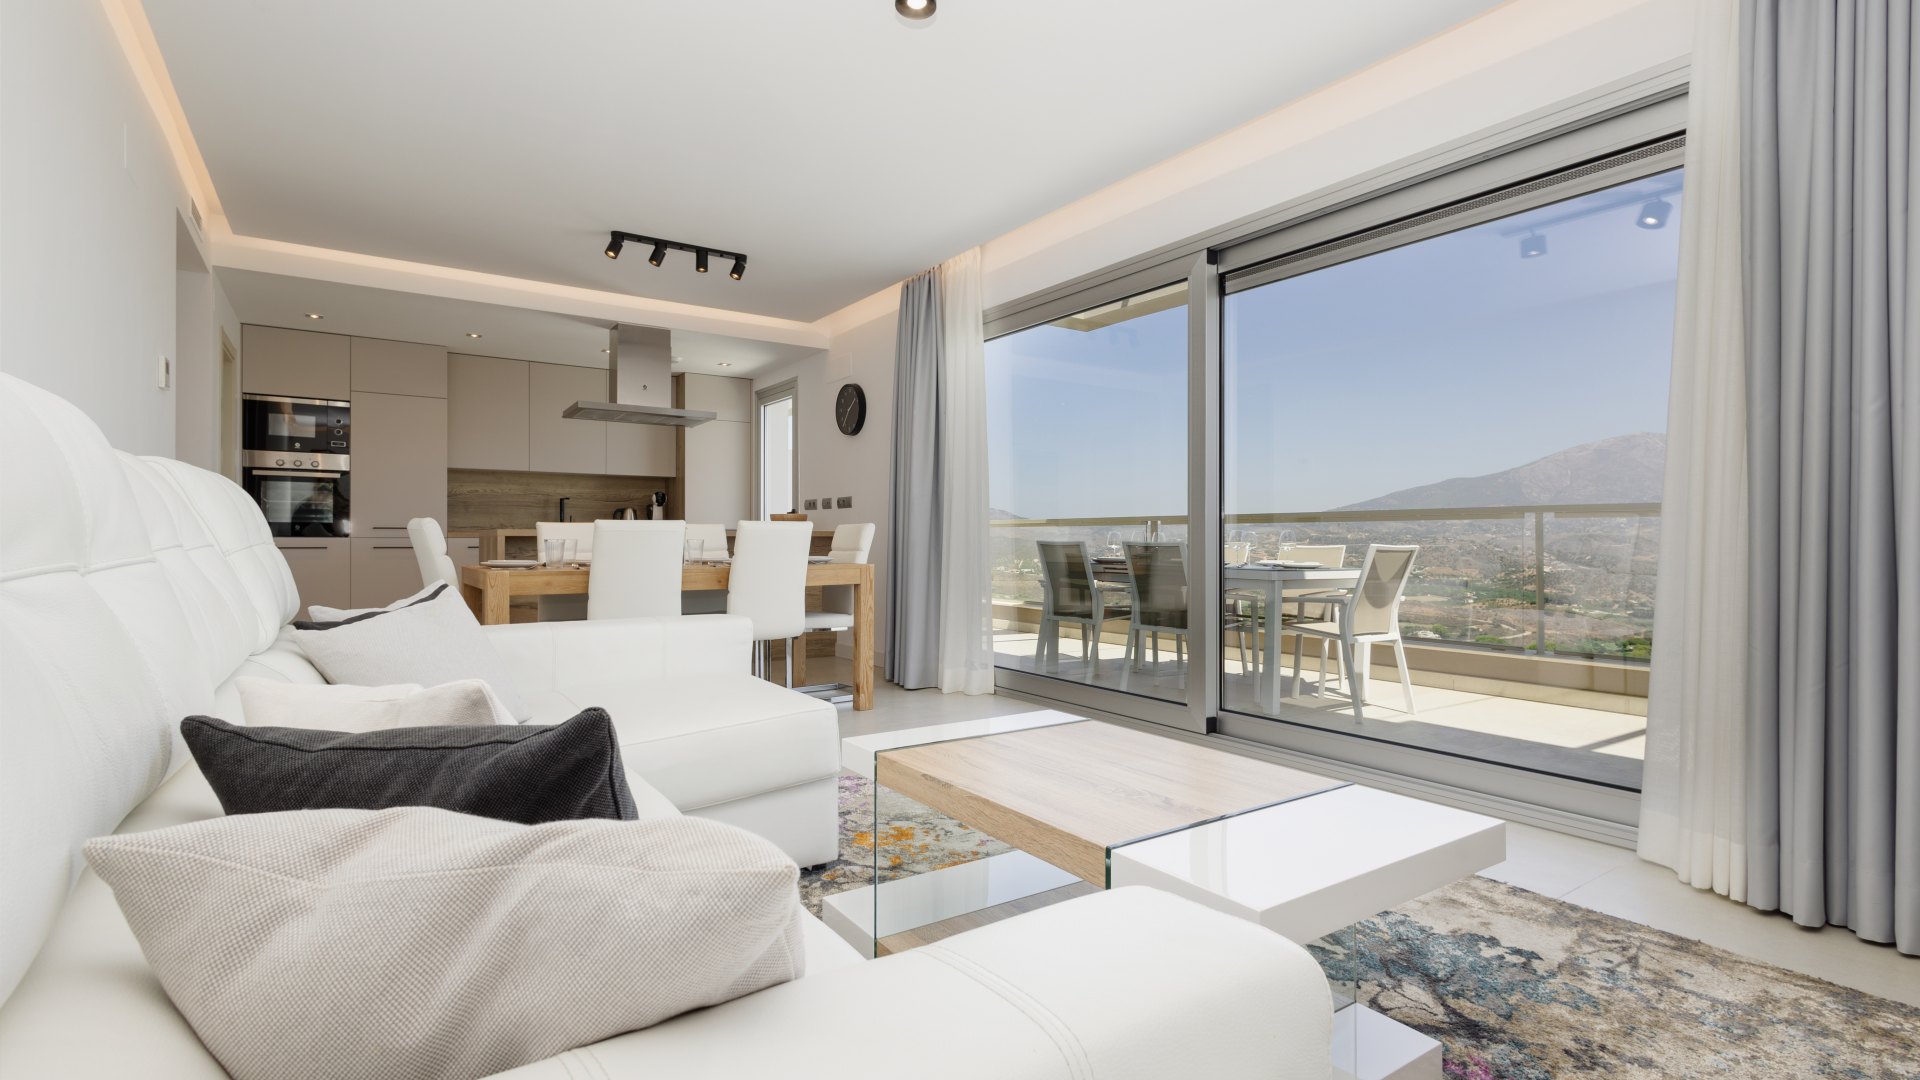 Apartment located in the Harmony Urbanization, in Cala de Mijas. The apartment is distributed on one floor, the house consisting of three bedrooms, 2 bathrooms, living room, dining room, kitchen, terrace and solarium and on a second floor the solarium.